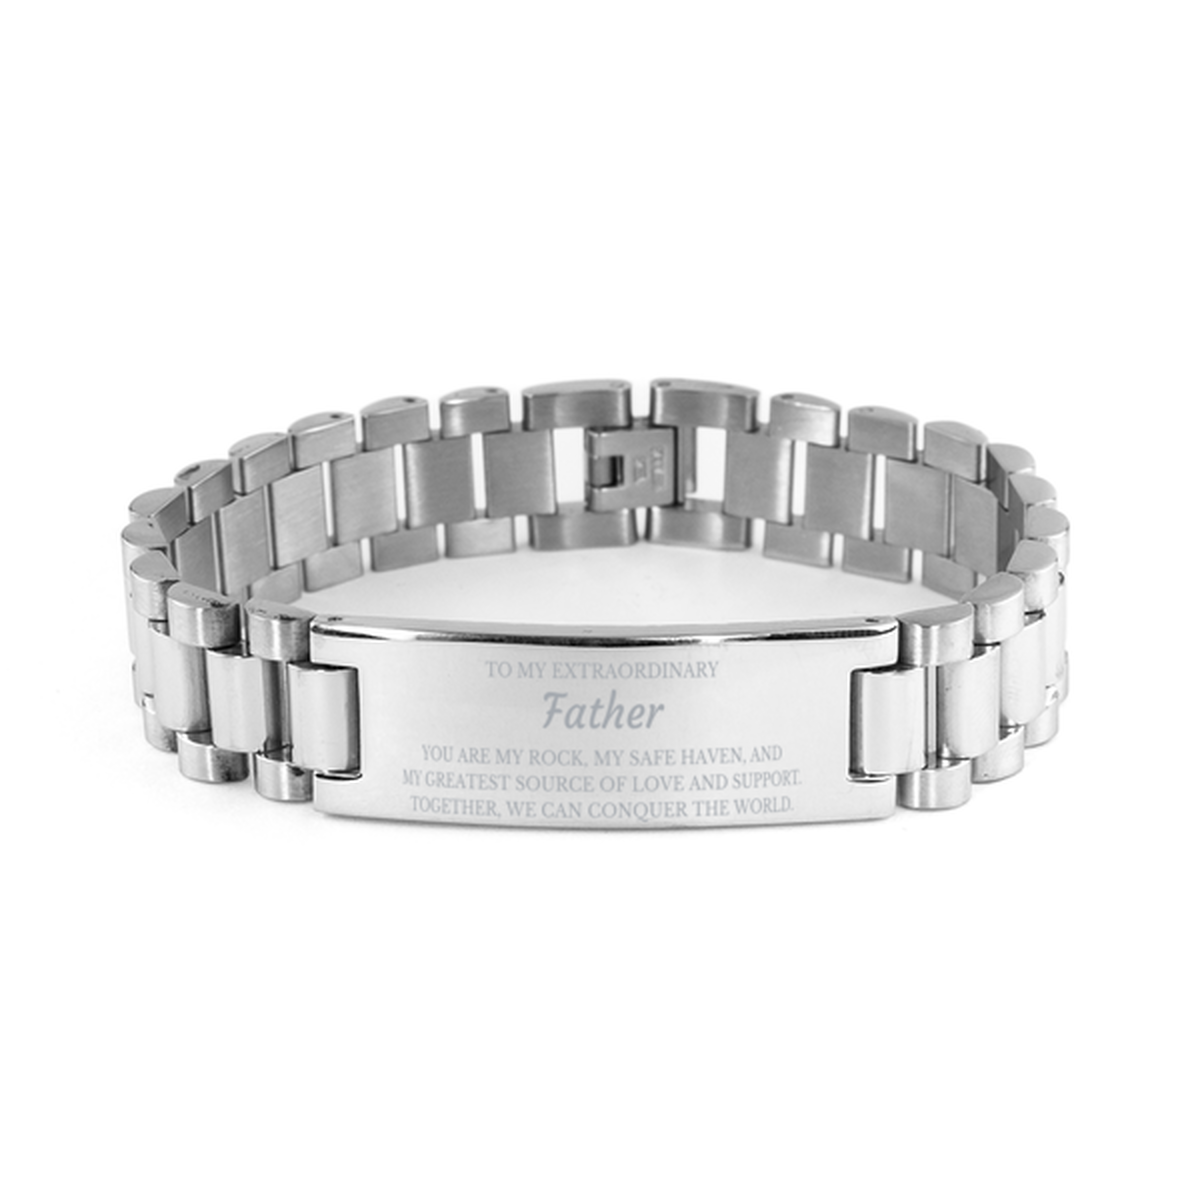 To My Extraordinary Father Gifts, Together, we can conquer the world, Birthday Ladder Stainless Steel Bracelet For Father, Christmas Gifts For Father